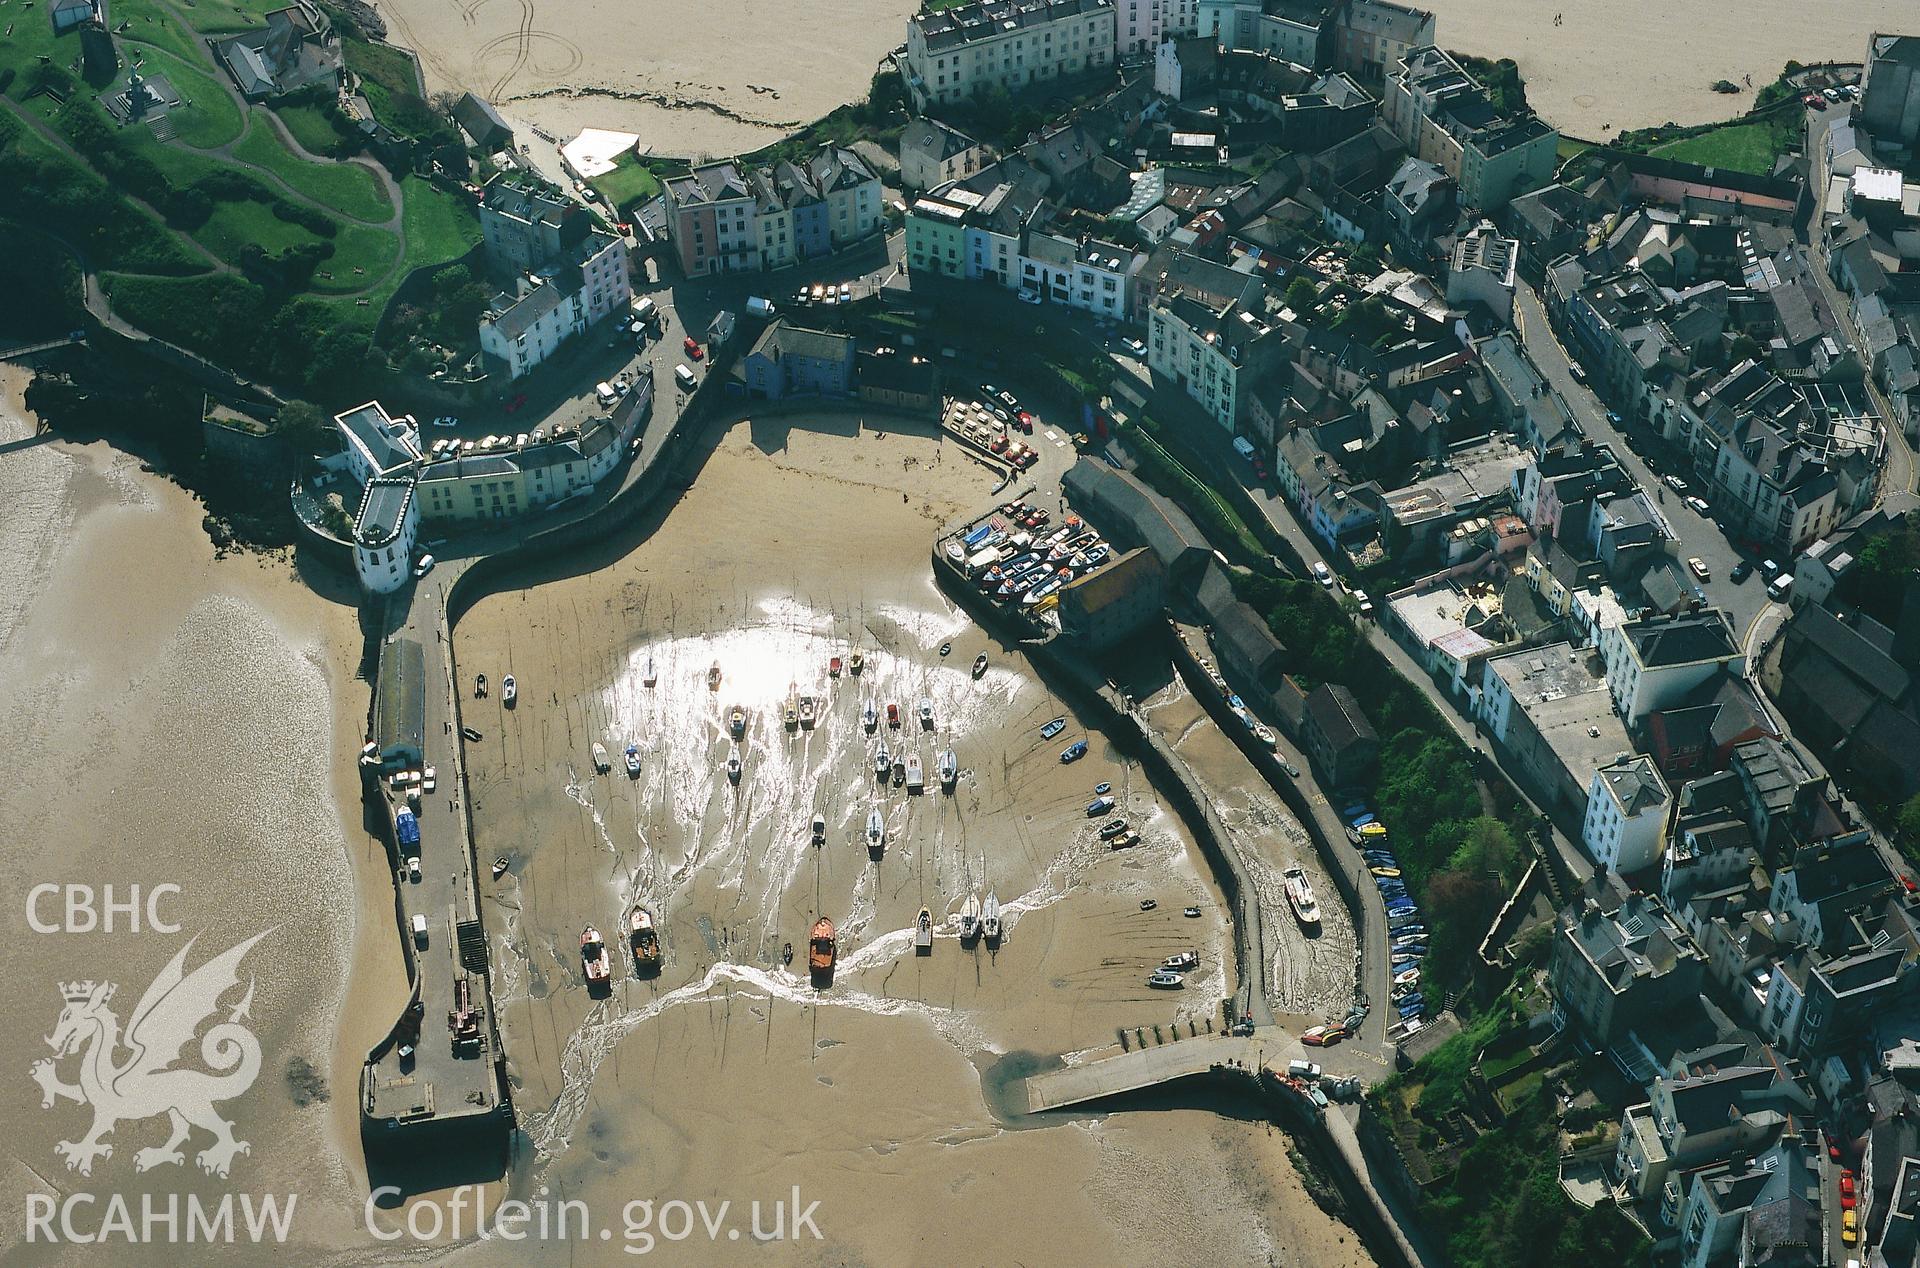 RCAHMW colour slide oblique aerial photograph of Tenby Harbour, Tenby, taken by T.G.Driver on the 02/05/2000